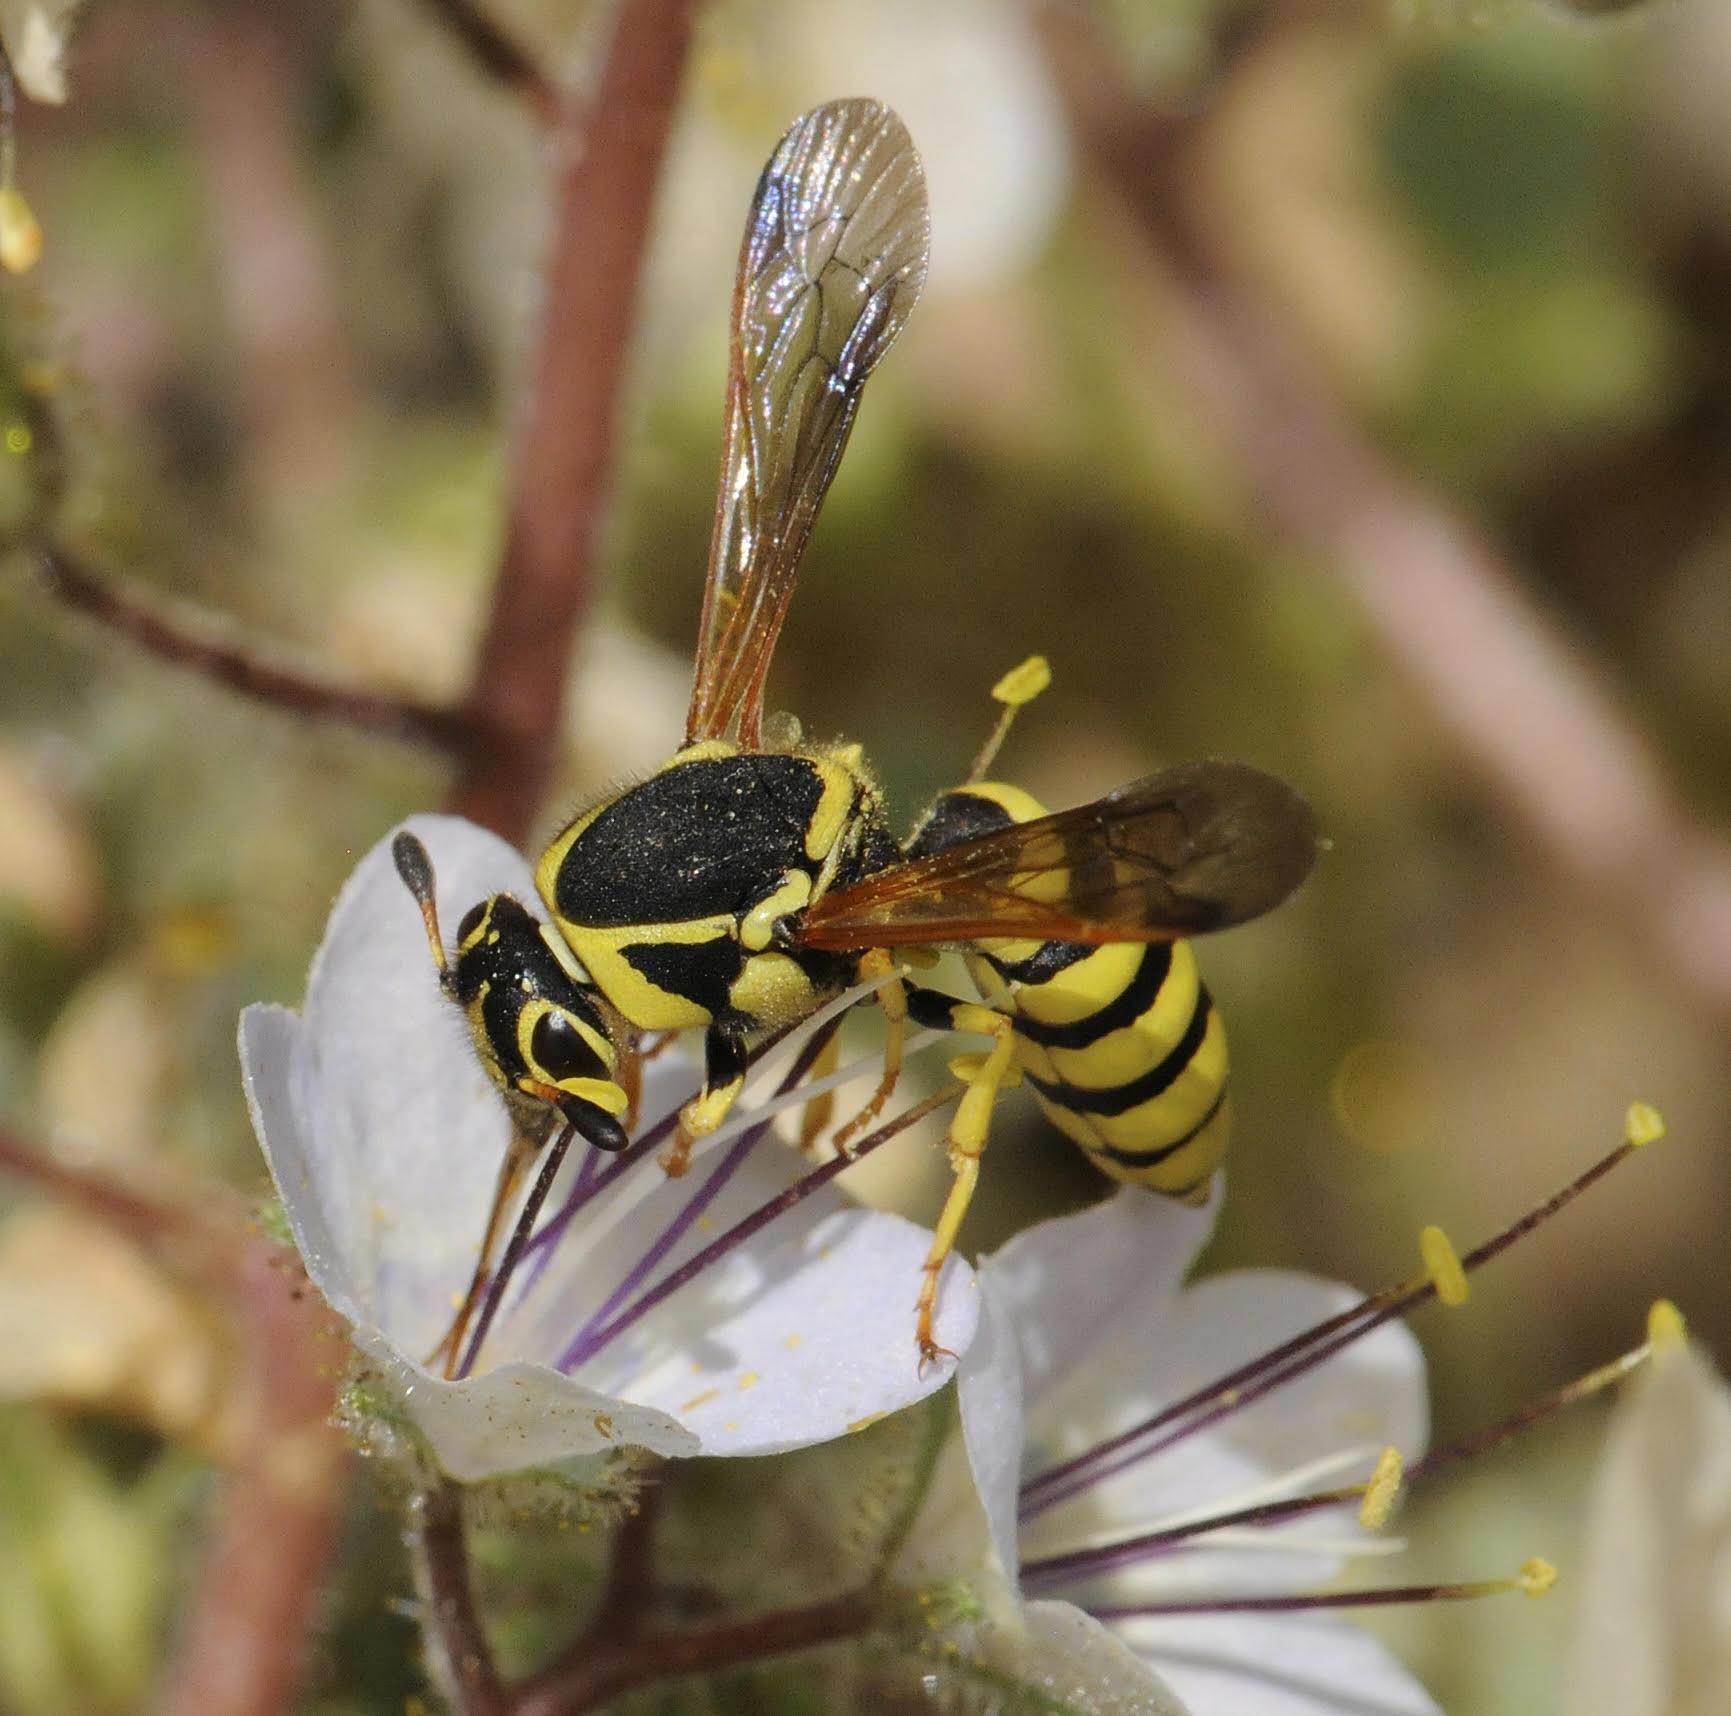 a yellow and black wasp sips from a white flower